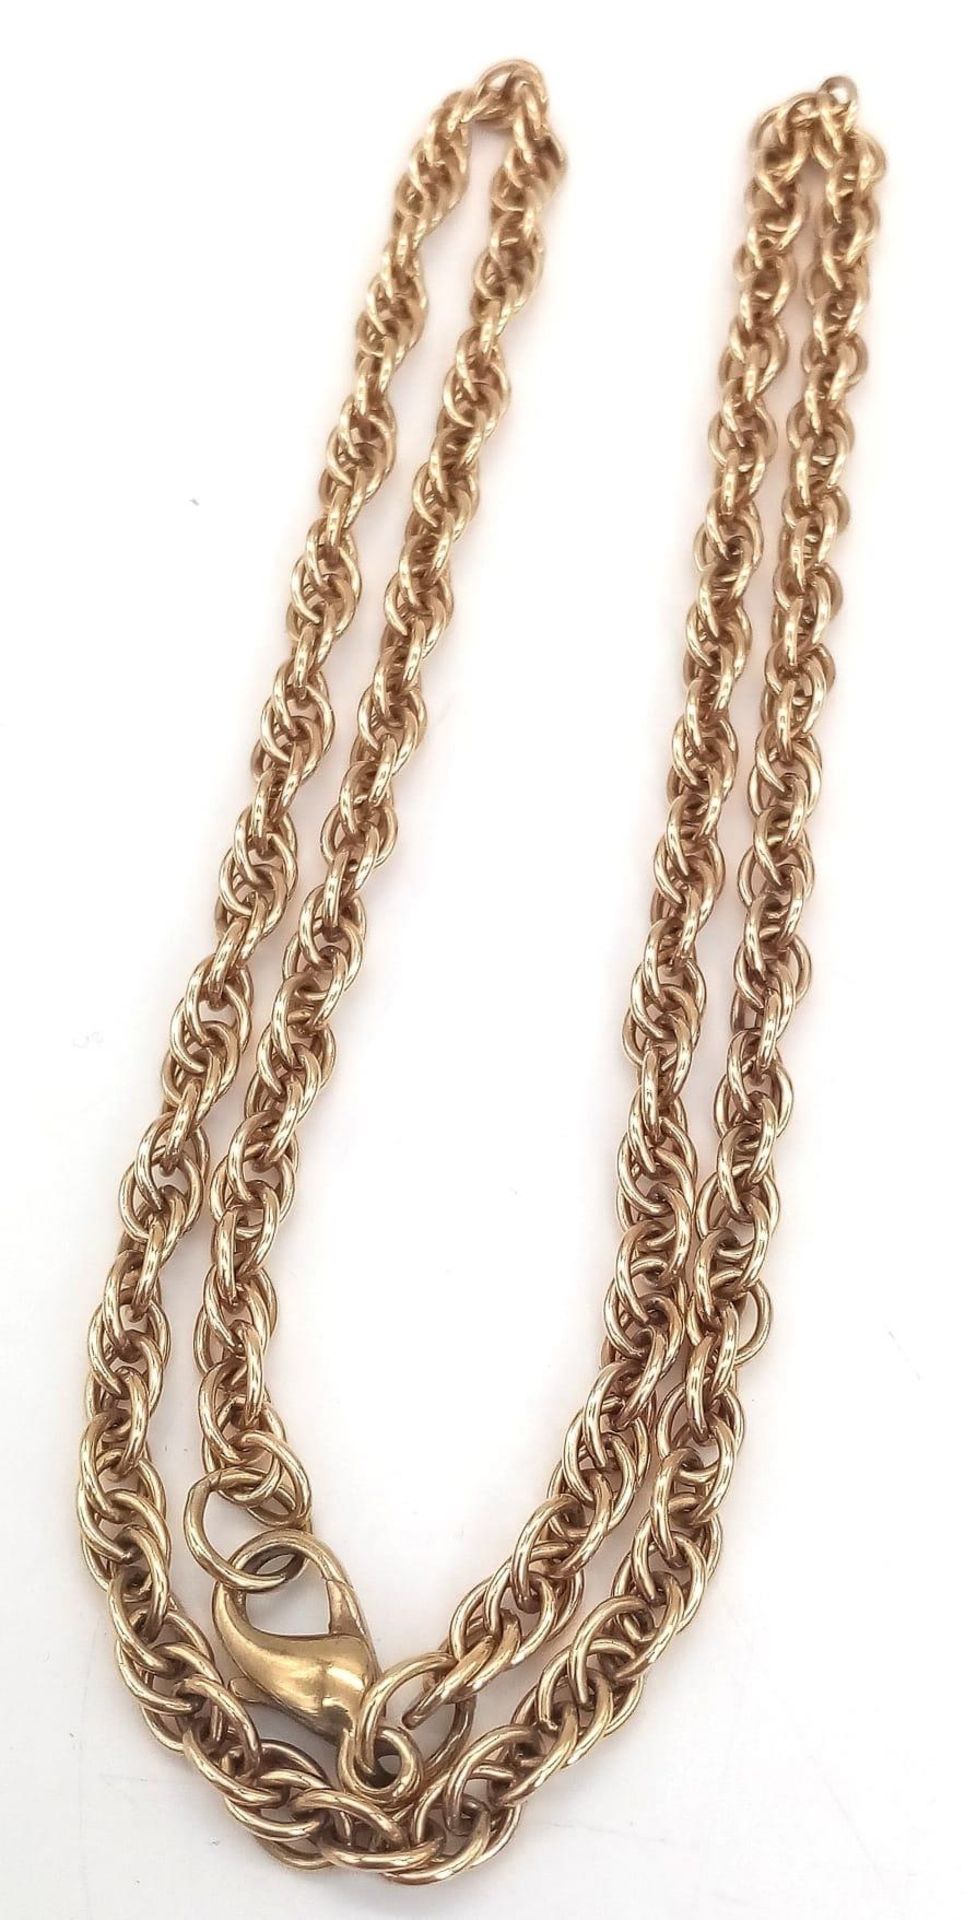 A Classic 9K Yellow Gold Rope Necklace. 44cm. 17.77g - Image 2 of 4